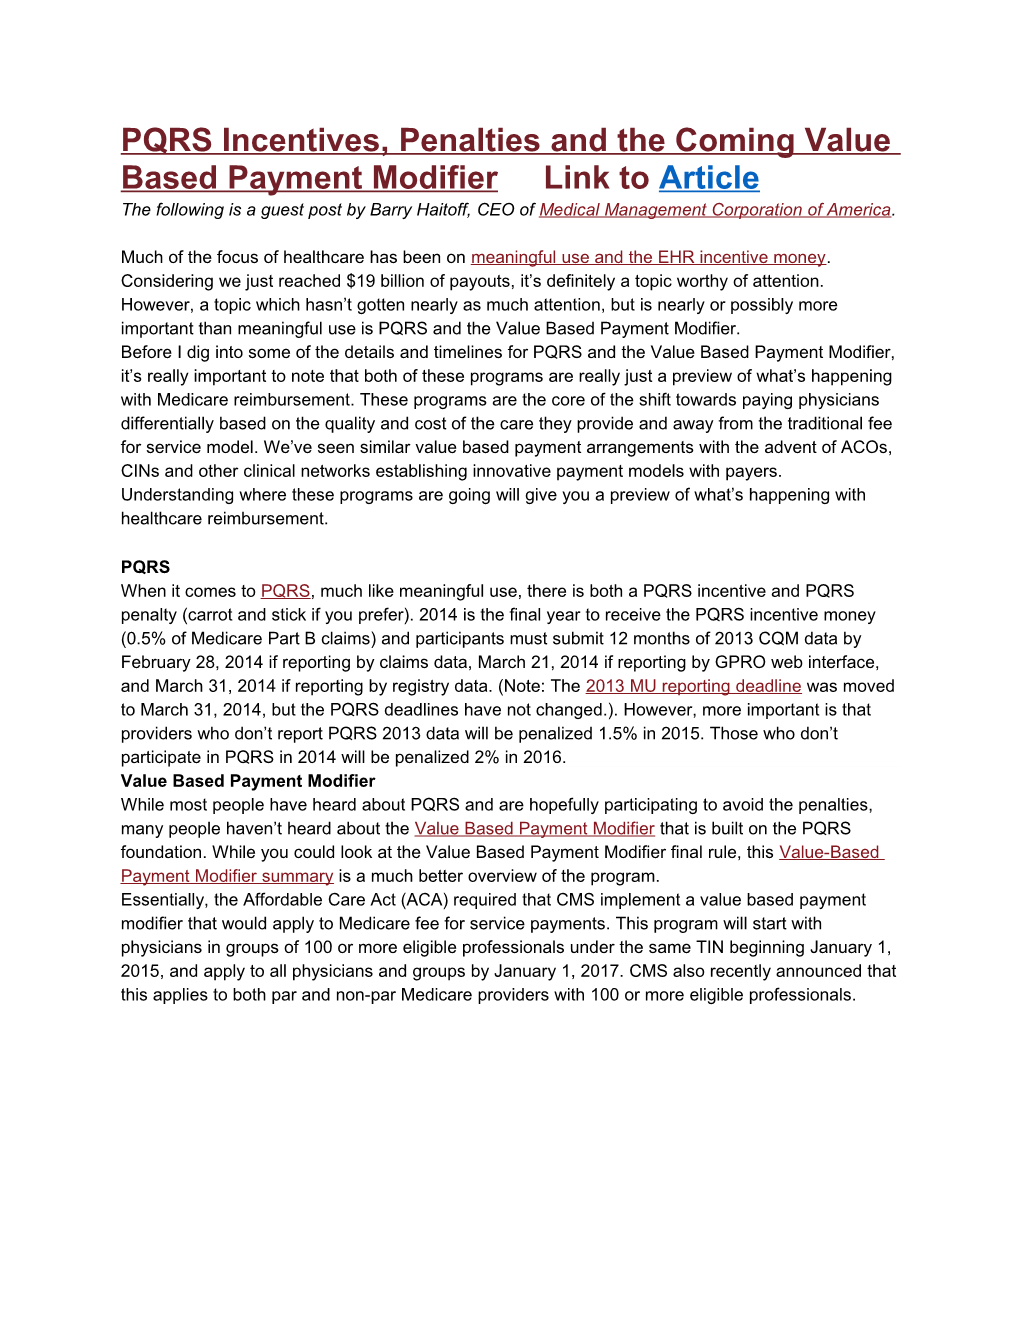 PQRS Incentives, Penalties and the Coming Value Based Payment Modifier Link to Article